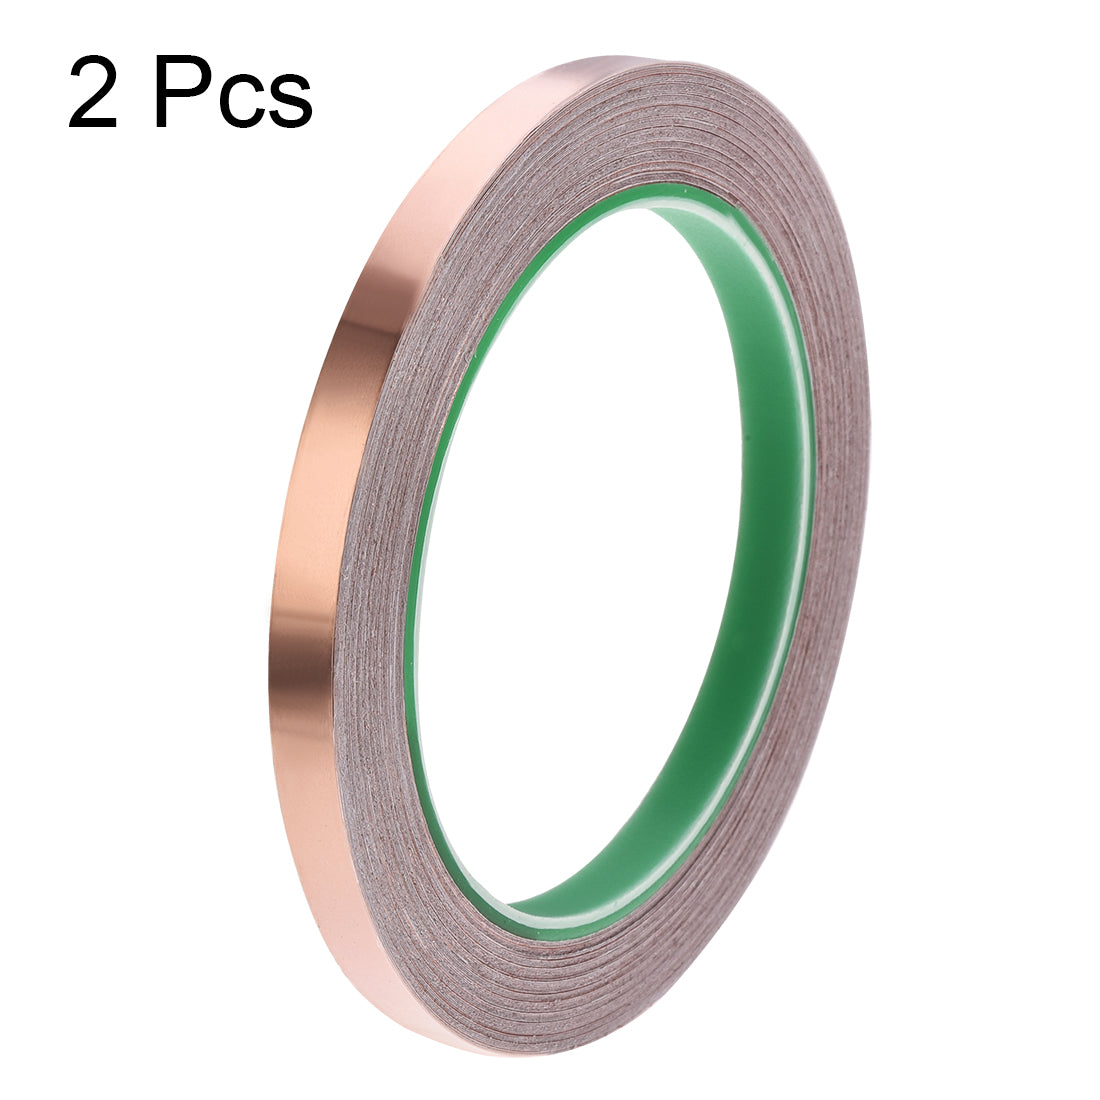 uxcell Uxcell Double Sided Conductive Tape Copper Foil Tape 8mm x 20m for EMI Shielding 2 Roll